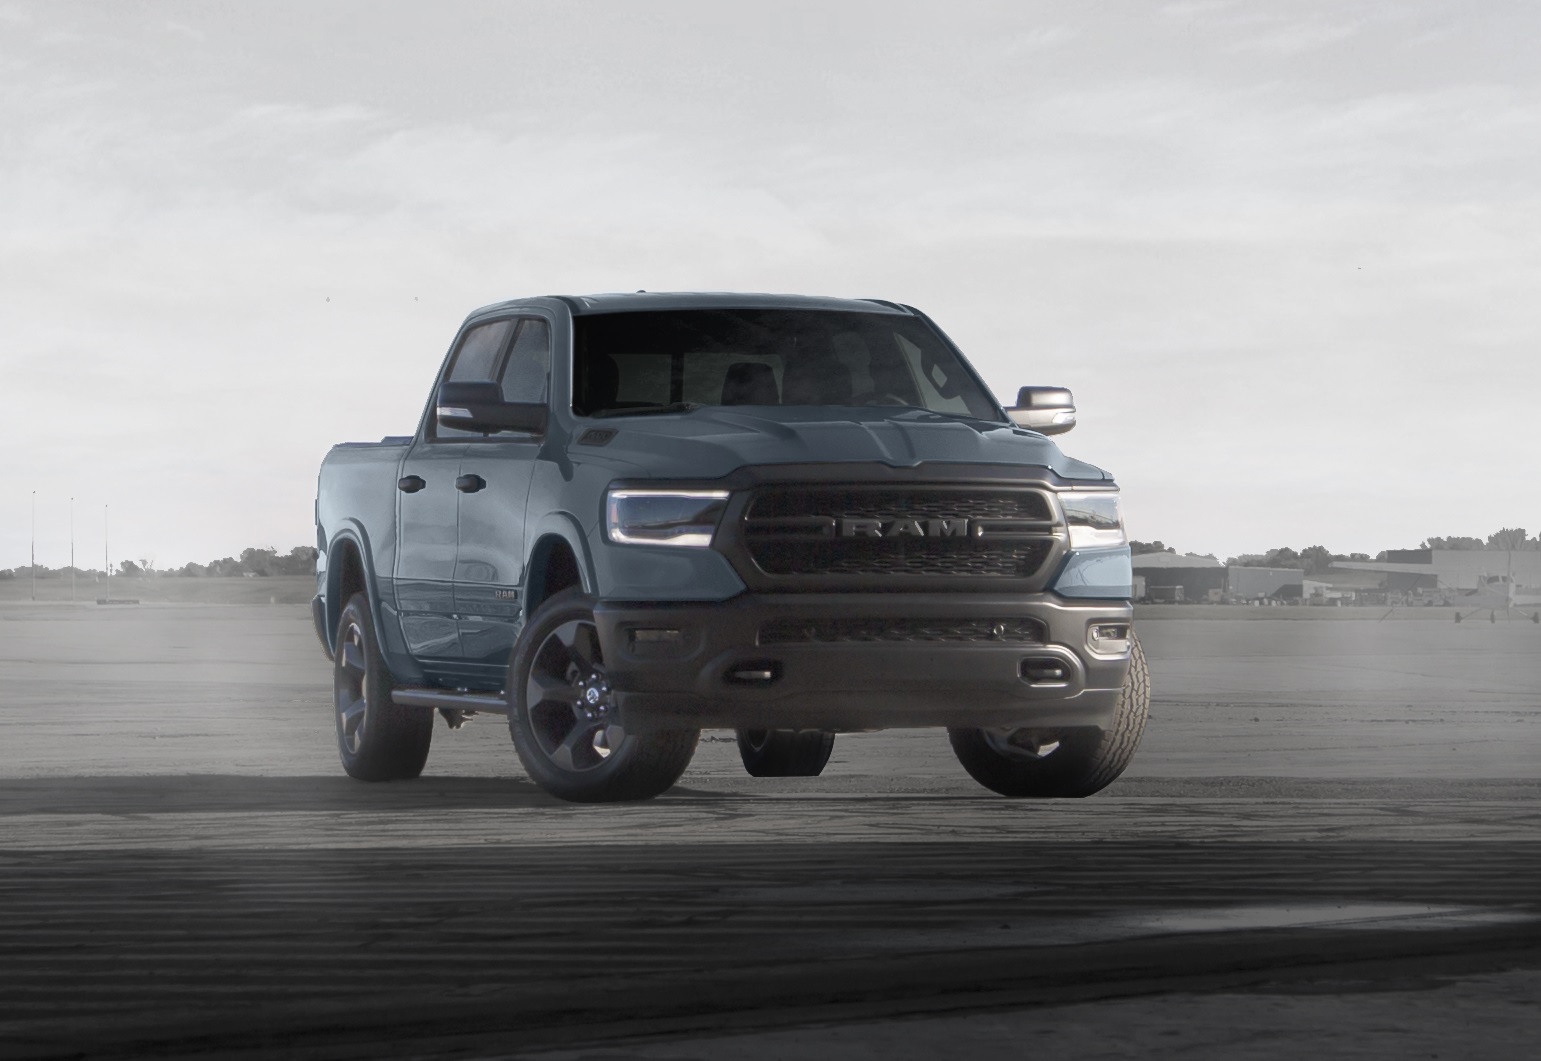 Ram Rolls Out Latest ‘Built to Serve’ Model | THE SHOP